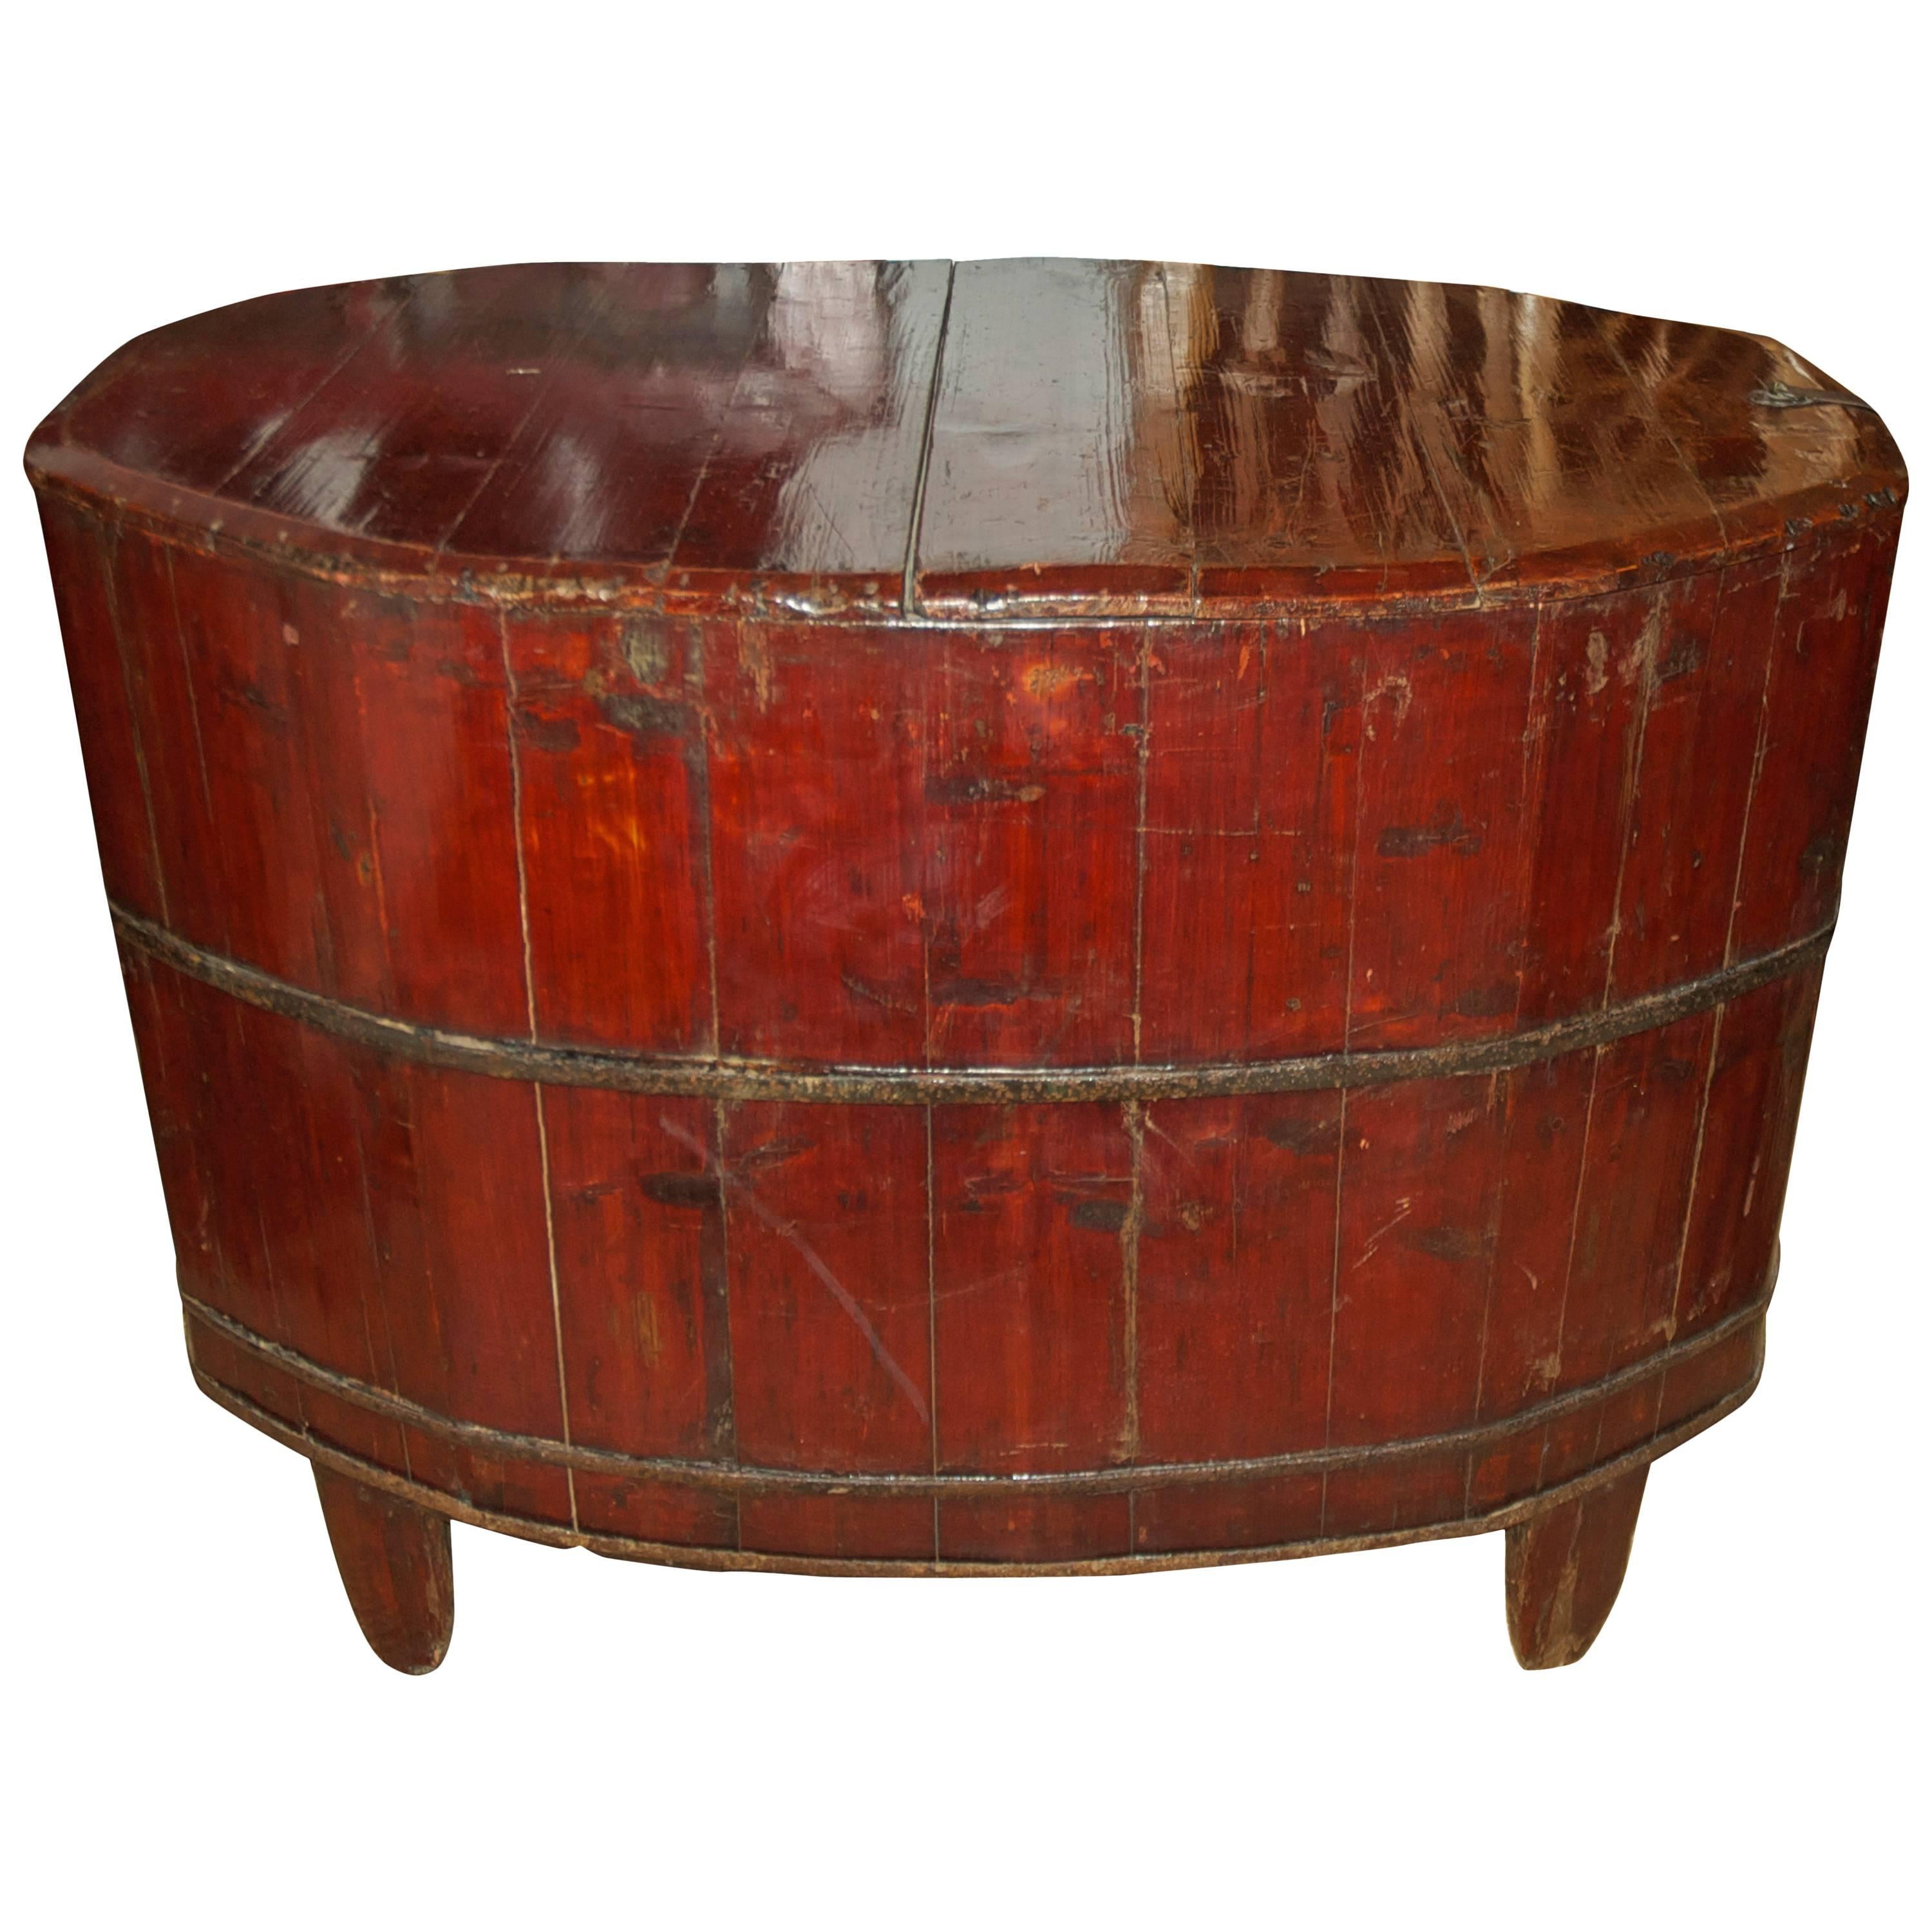 A storage container for rice or wheat in lacquered wood (probably elm) with cinnabar-colored paint on tapered feet, with lift-top and iron side pulls. China, circa 1800s. Makes a lovely end table, coffee table and an interesting conversation